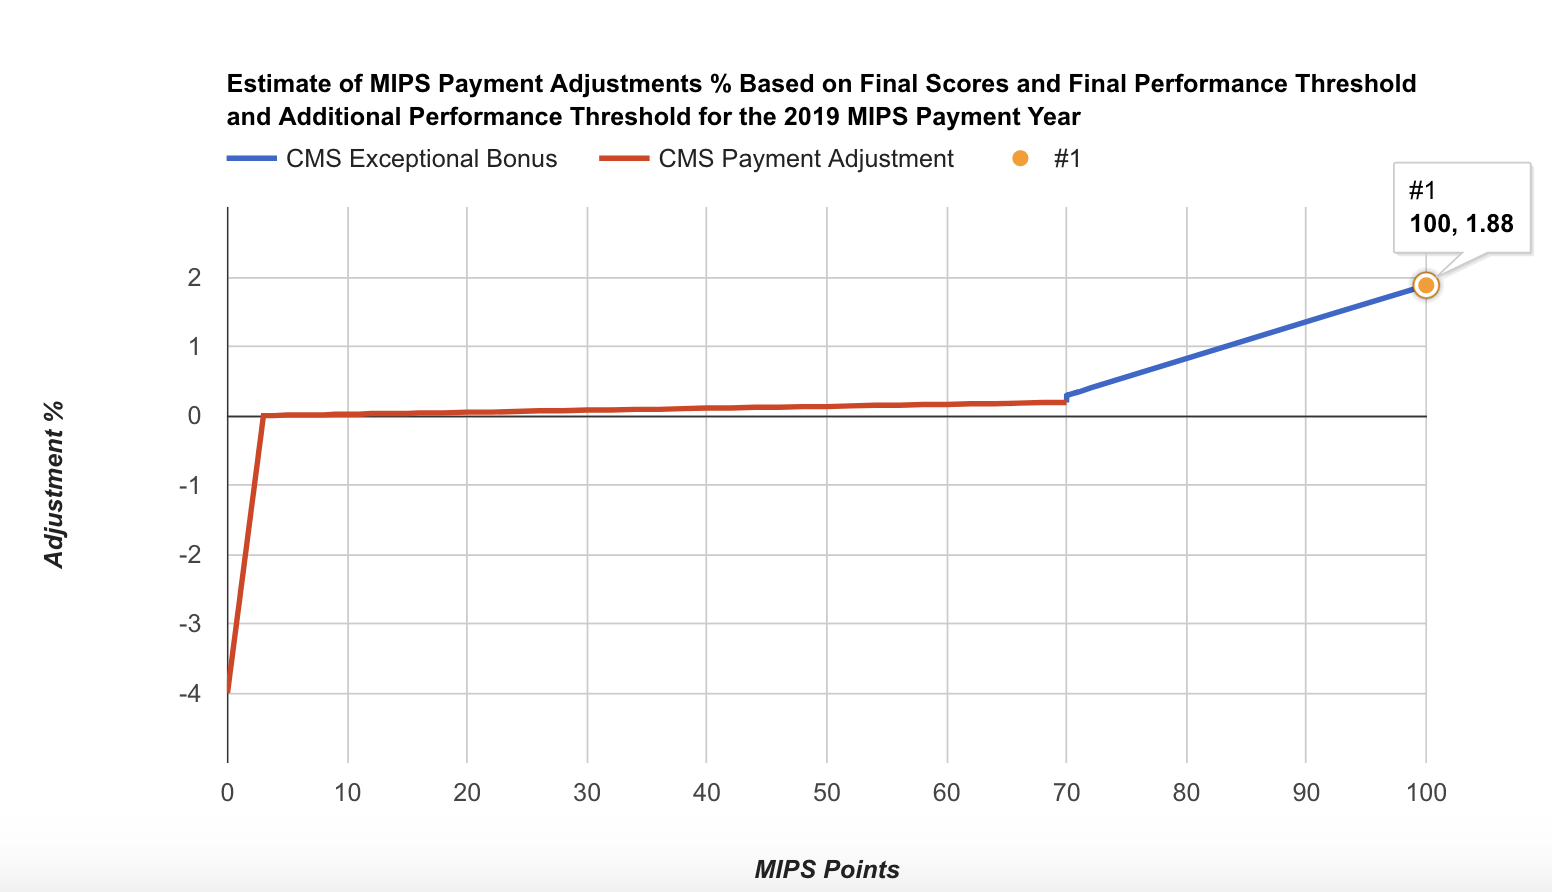 2019 MIPS Points adjustments